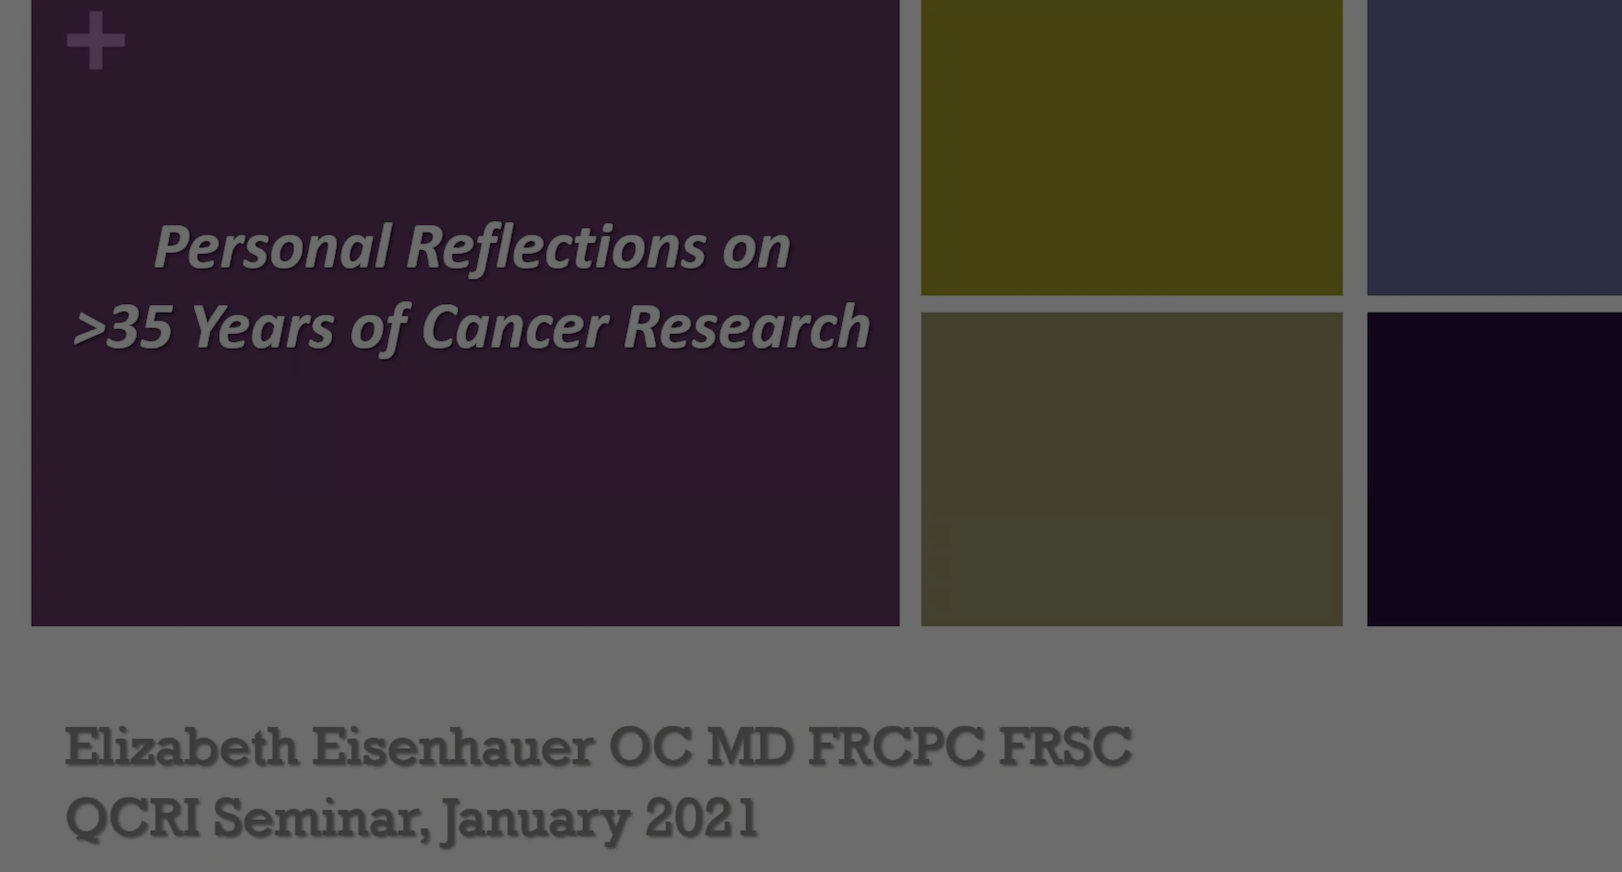 Jan 10, 2022 |  - Personal Reflections on Over 35 Years of Cancer Research Elizabeth Eisenhauer, OC MD FRCPC FRSC